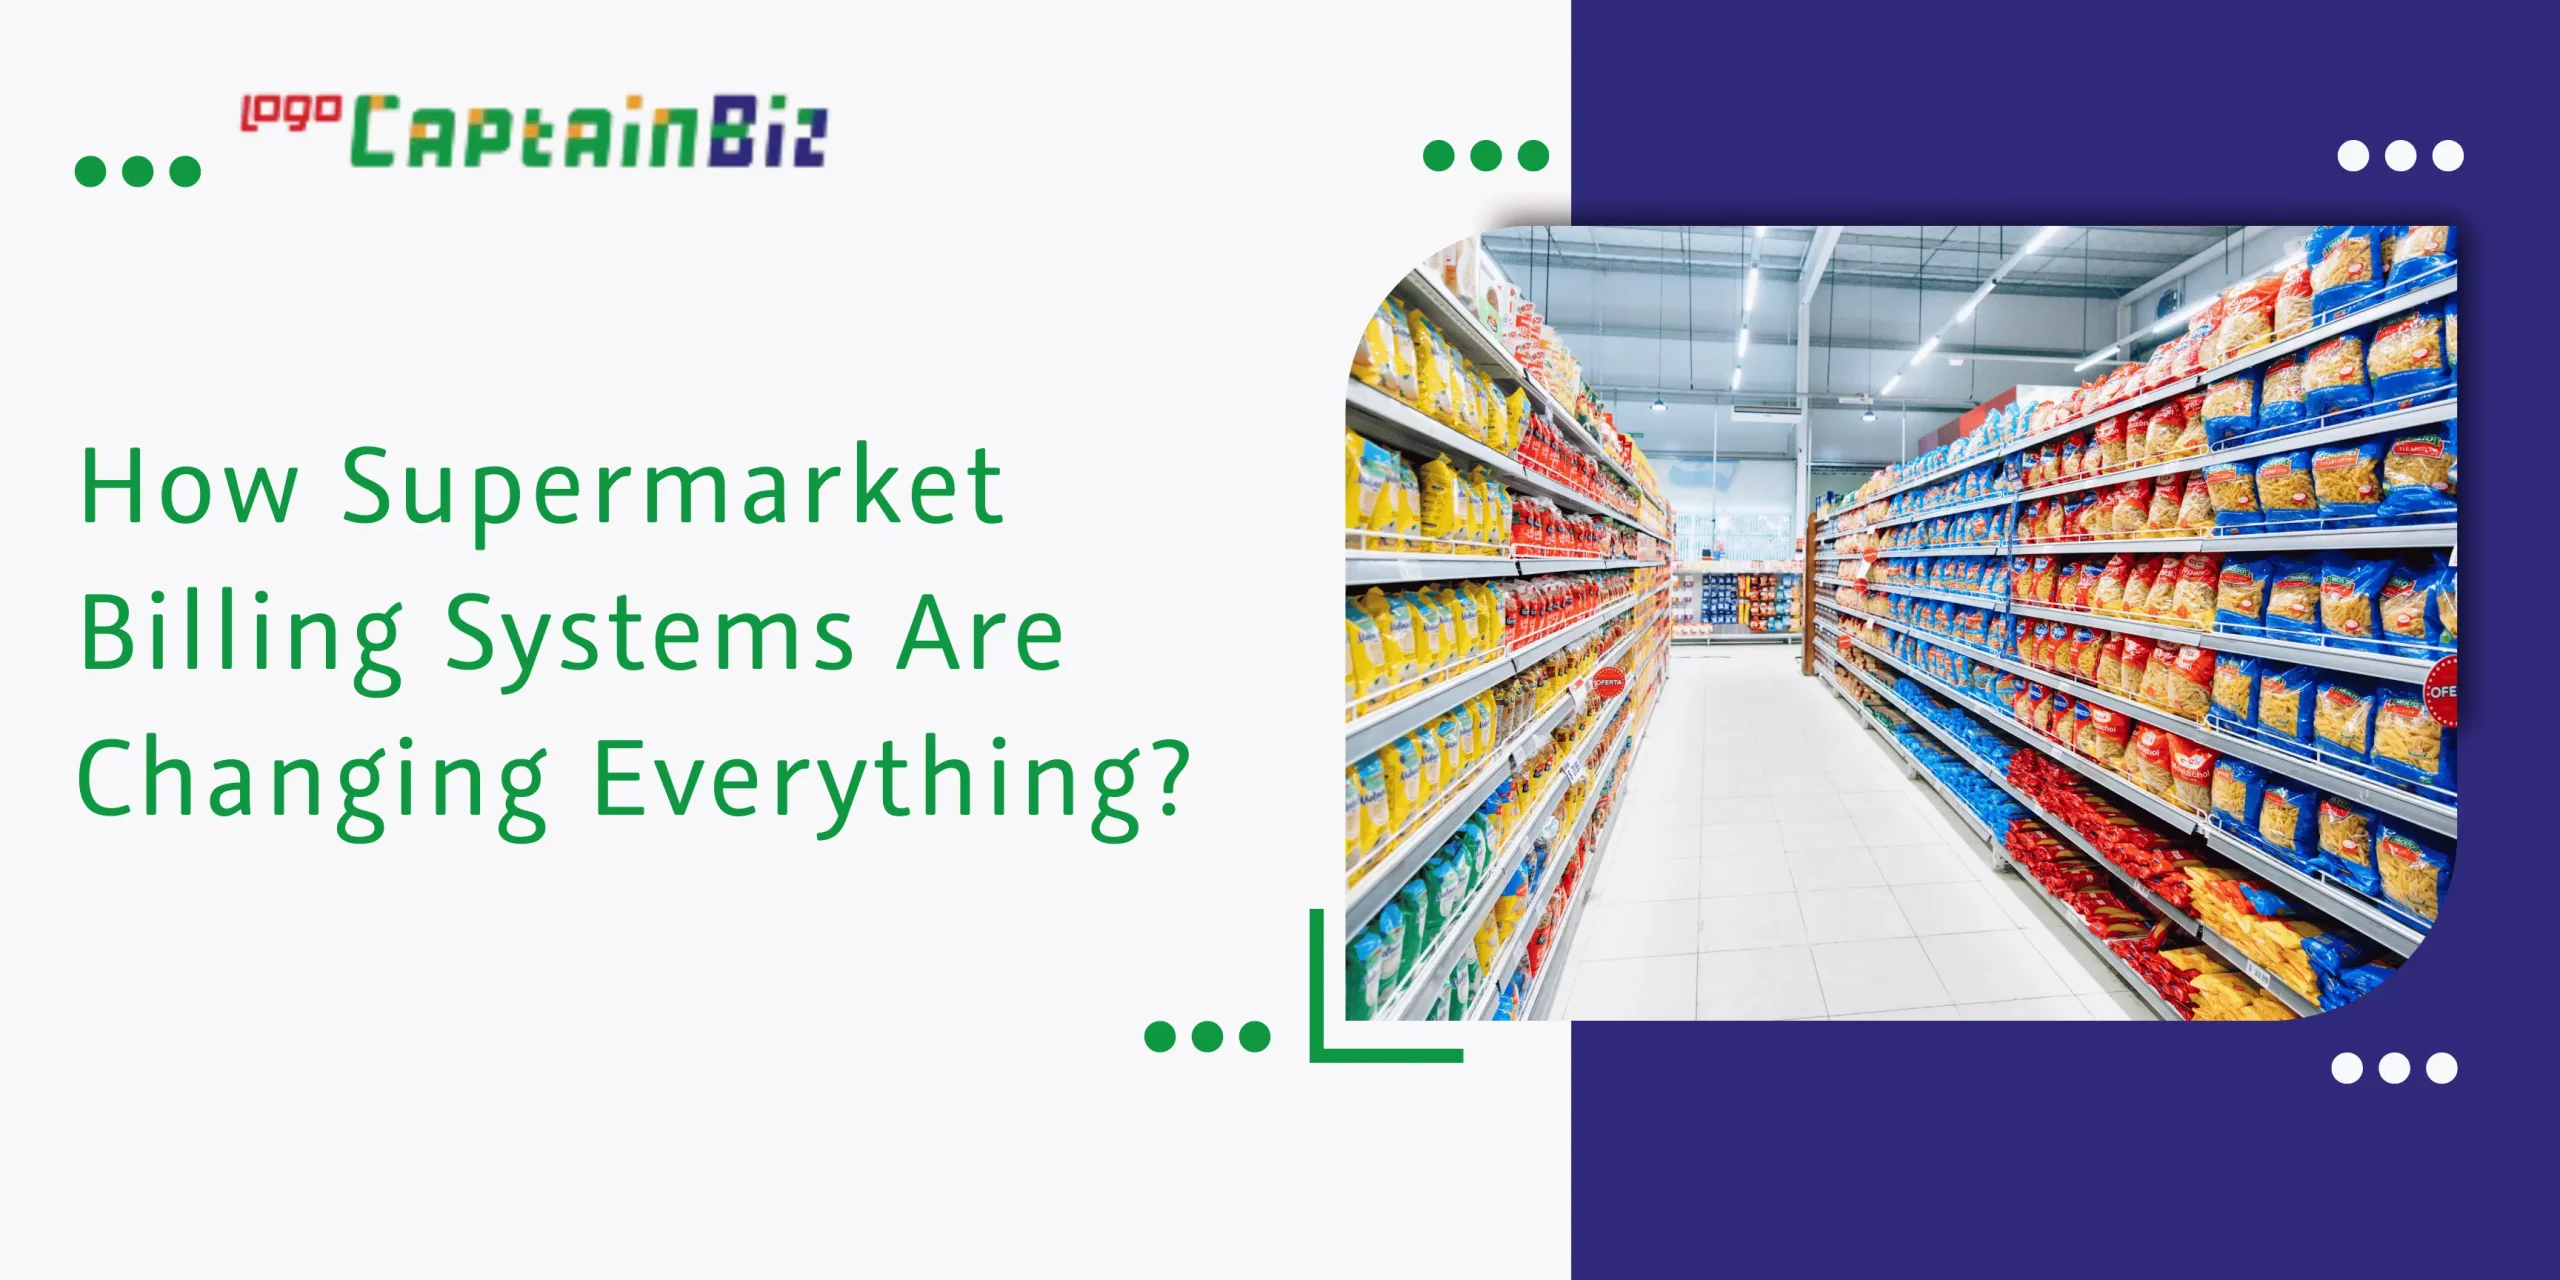 captainbiz how supermarket billing systems are changing everything